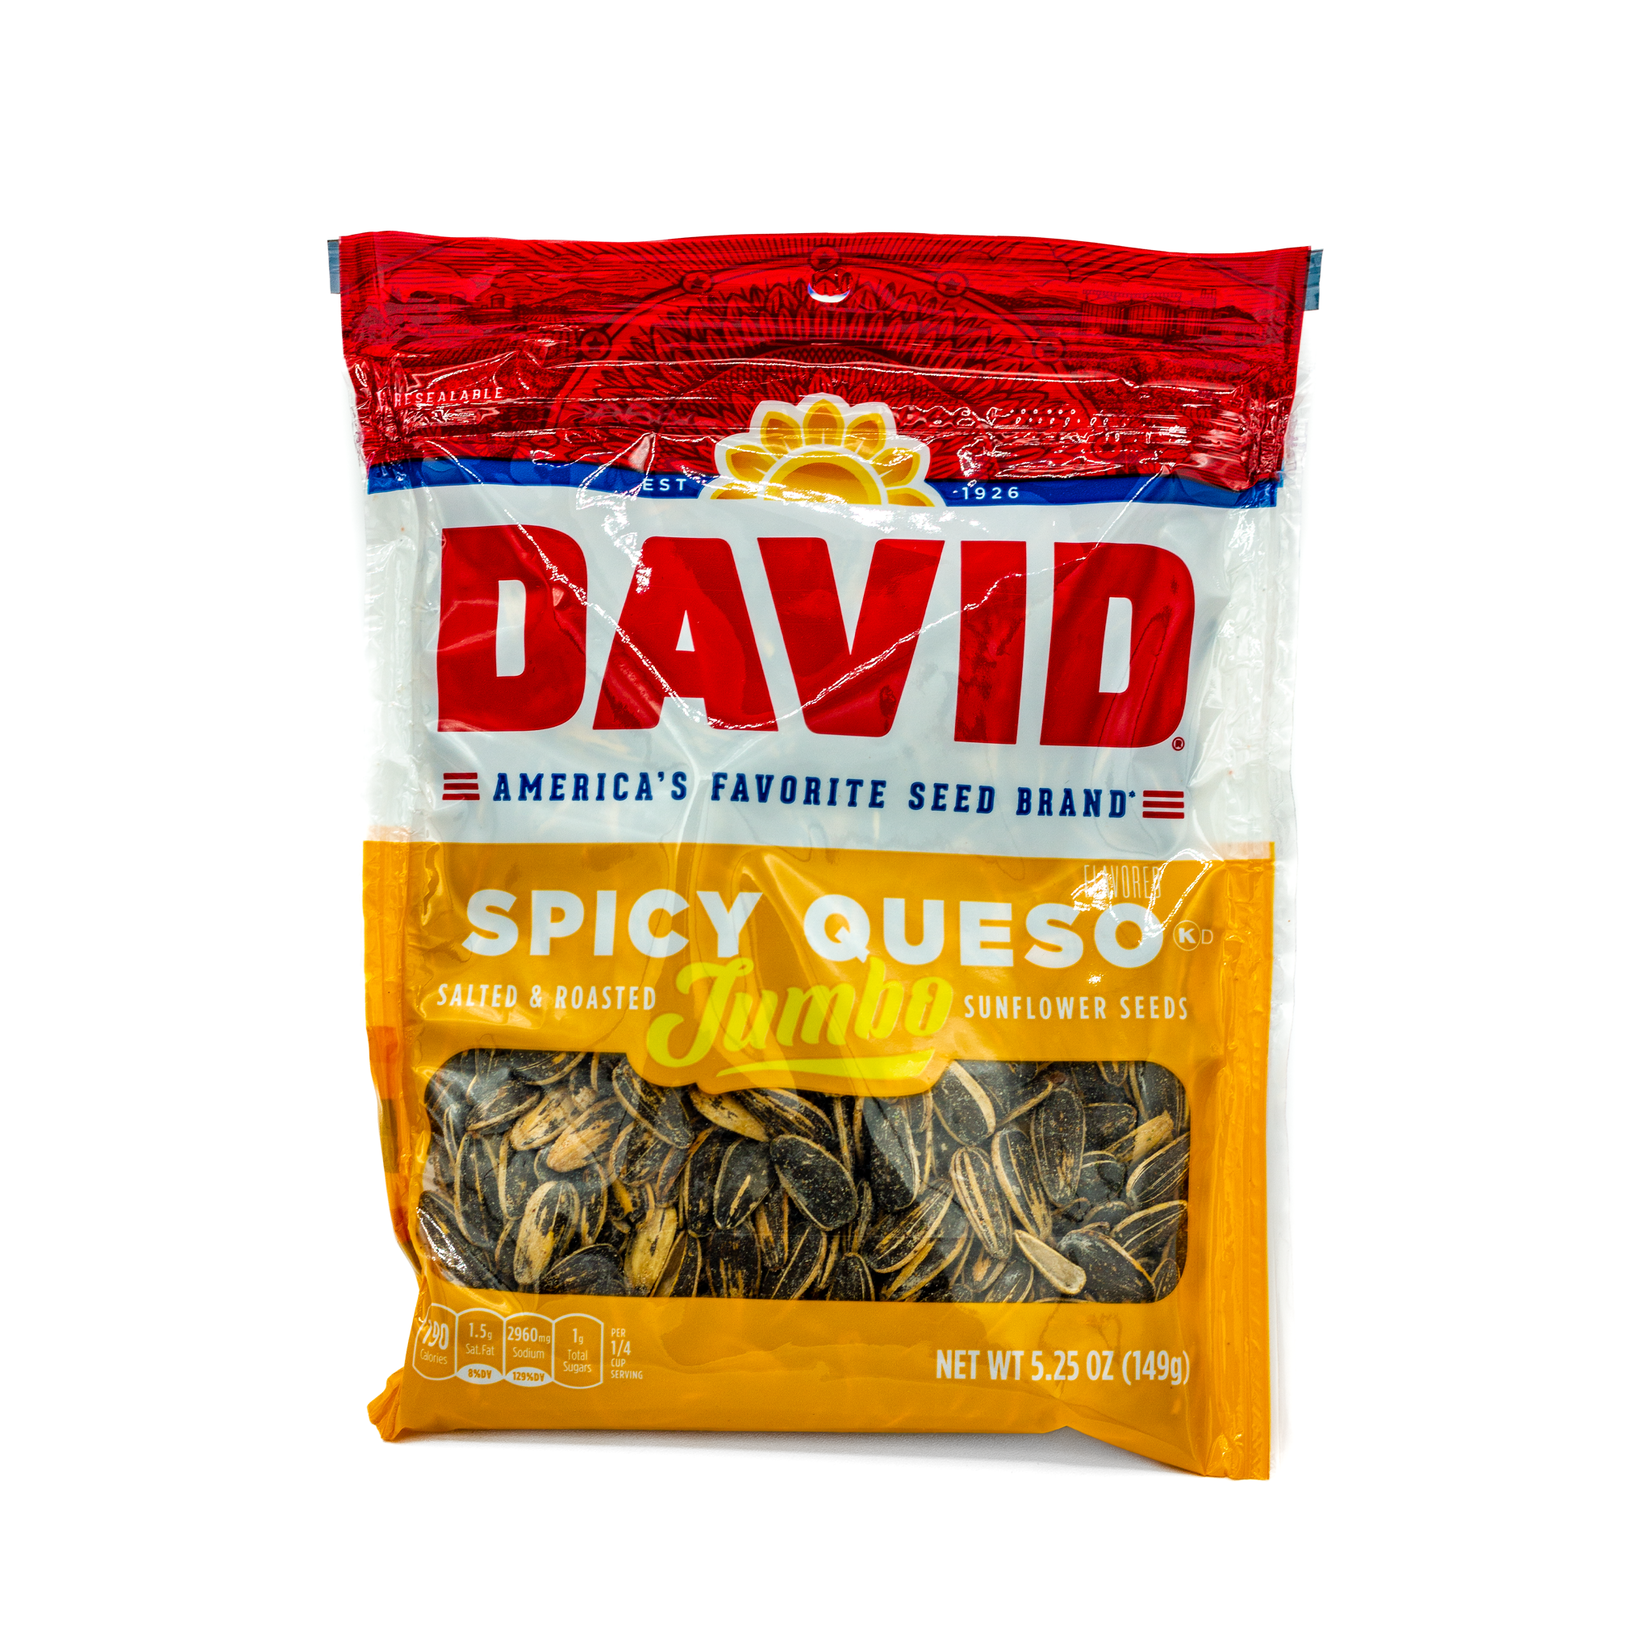 David sunflower seeds spicy queso 149g